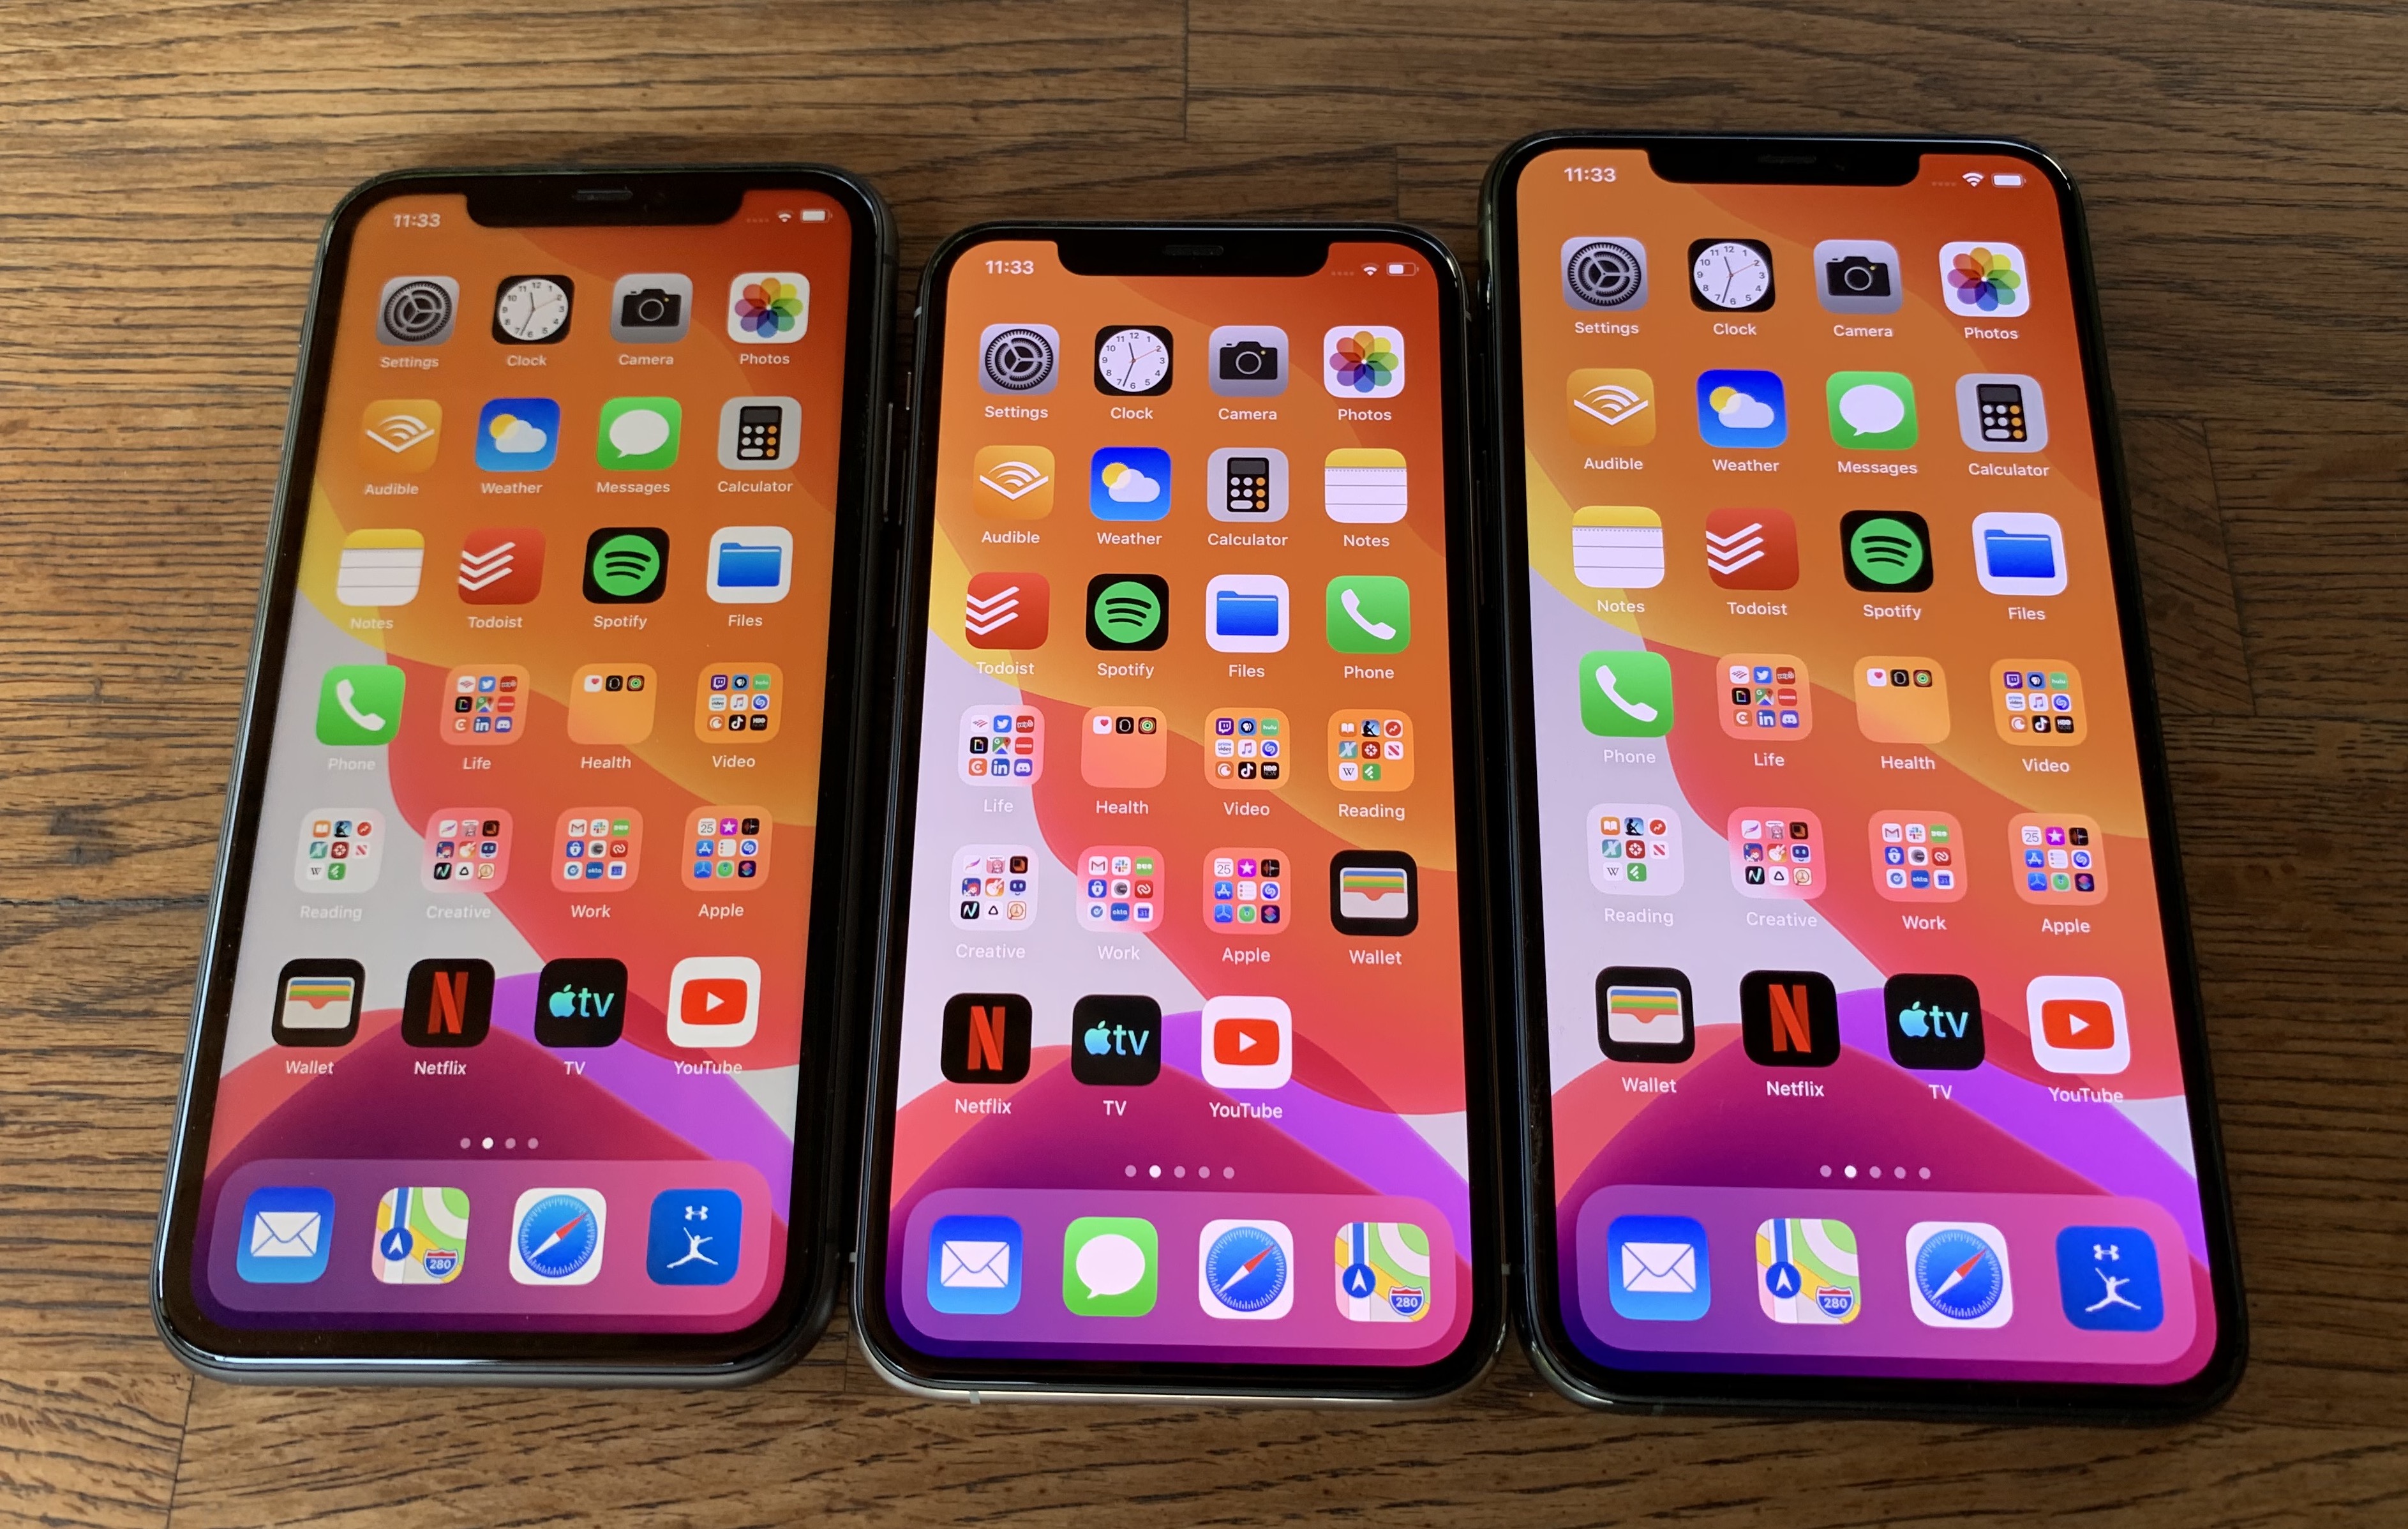 Apple releases iOS and iPadOS 13.6, macOS 10.15.6, and watchOS 6.2.8